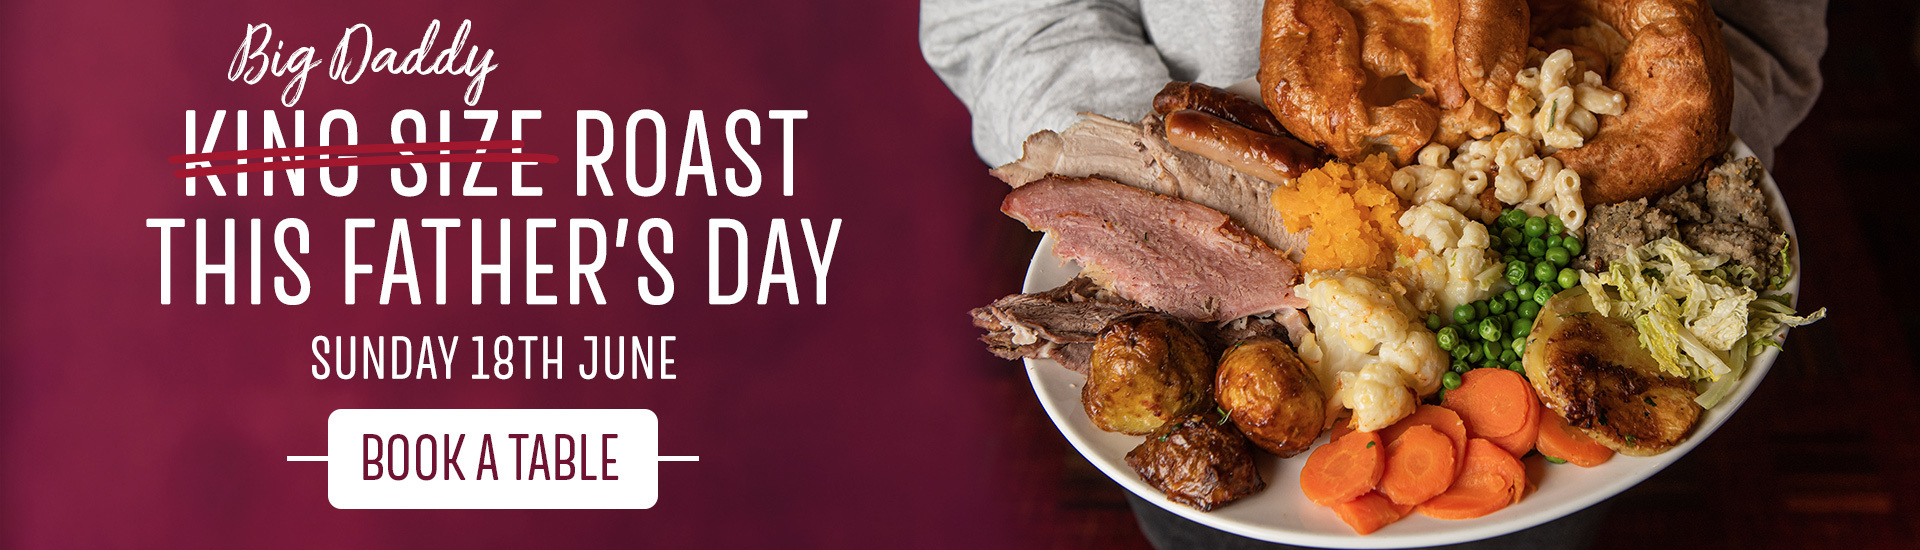 Father’s day carvery in Edinburgh, Father’s day at Toby Carvery Lauriston Farm